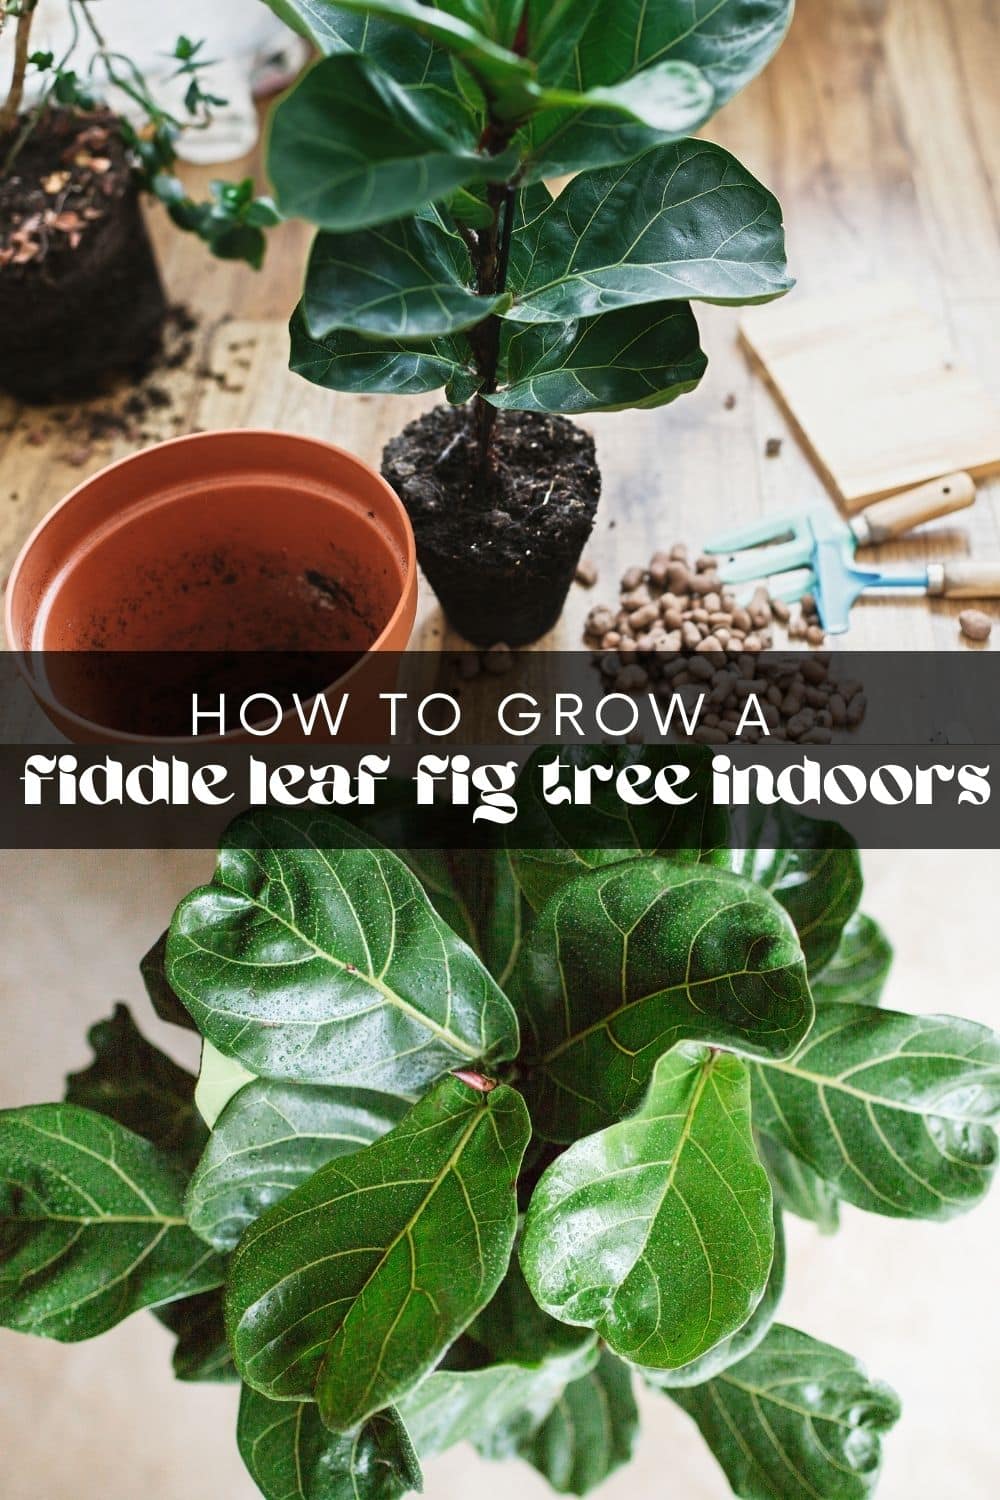 If you're looking for a statement piece that adds both height and greenery, you've likely come across the fiddle leaf fig tree. It's the perfect plant to add some life into your home! But is it even possible to grow a fiddle leaf fig tree indoors?